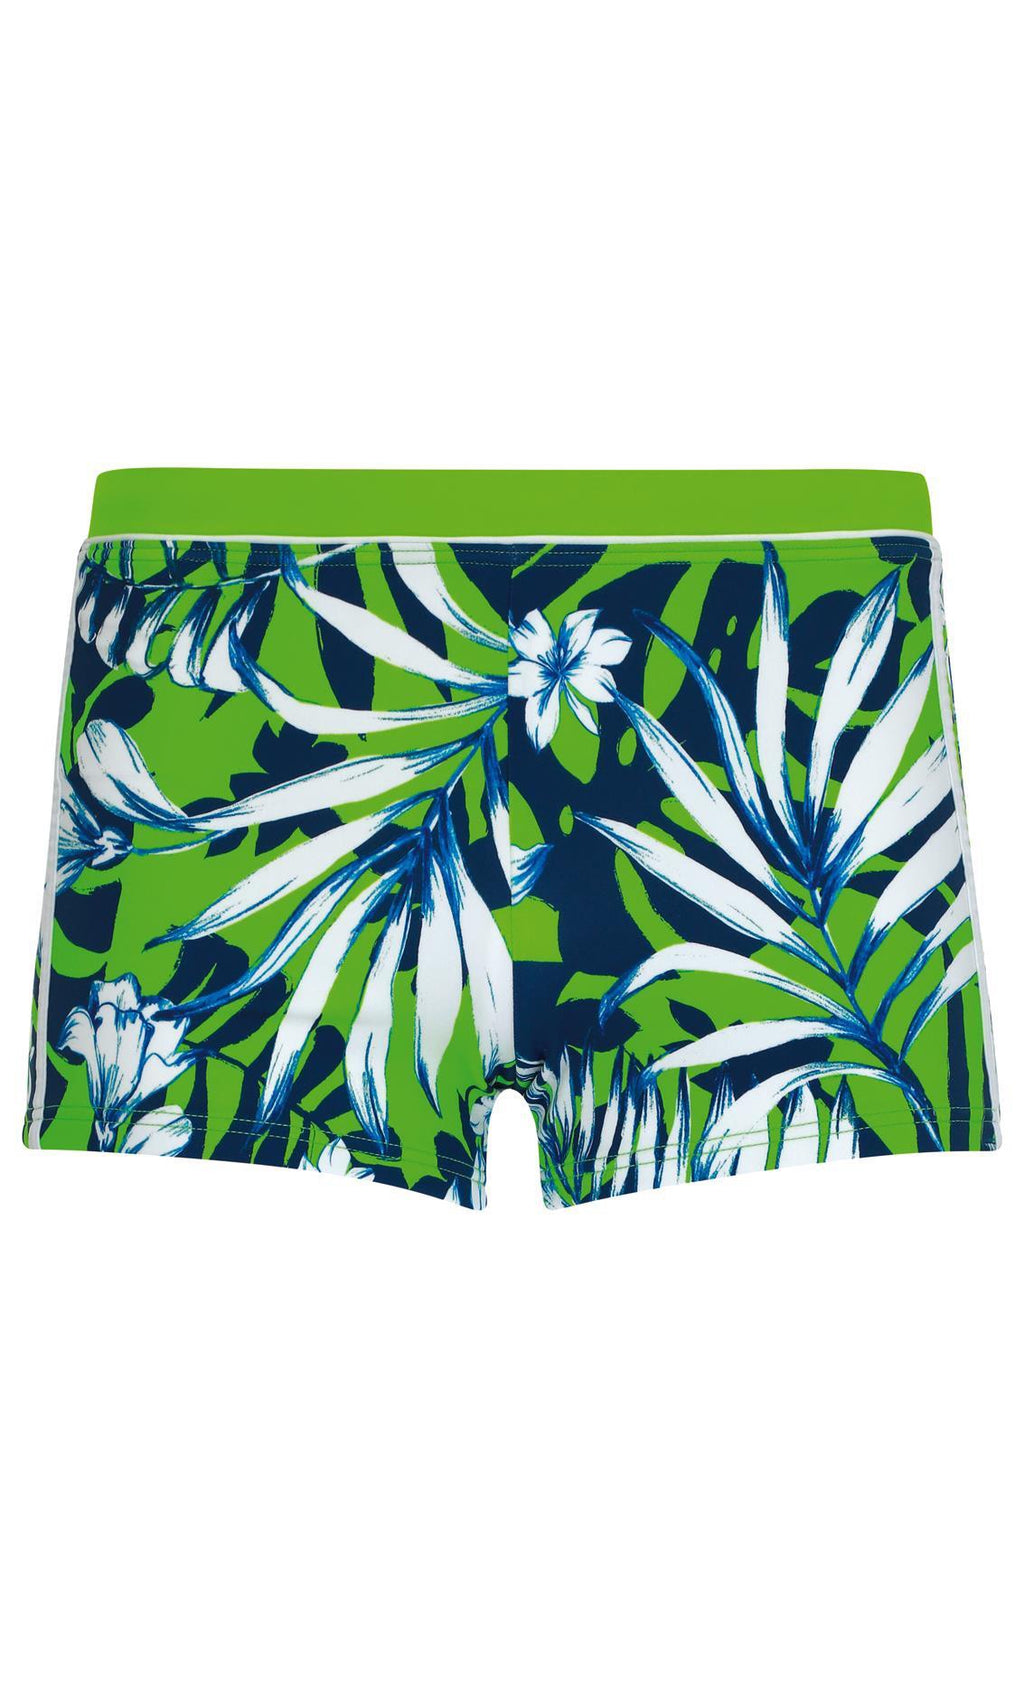 Sport Hibiscus Trunks, Special Order S - XL